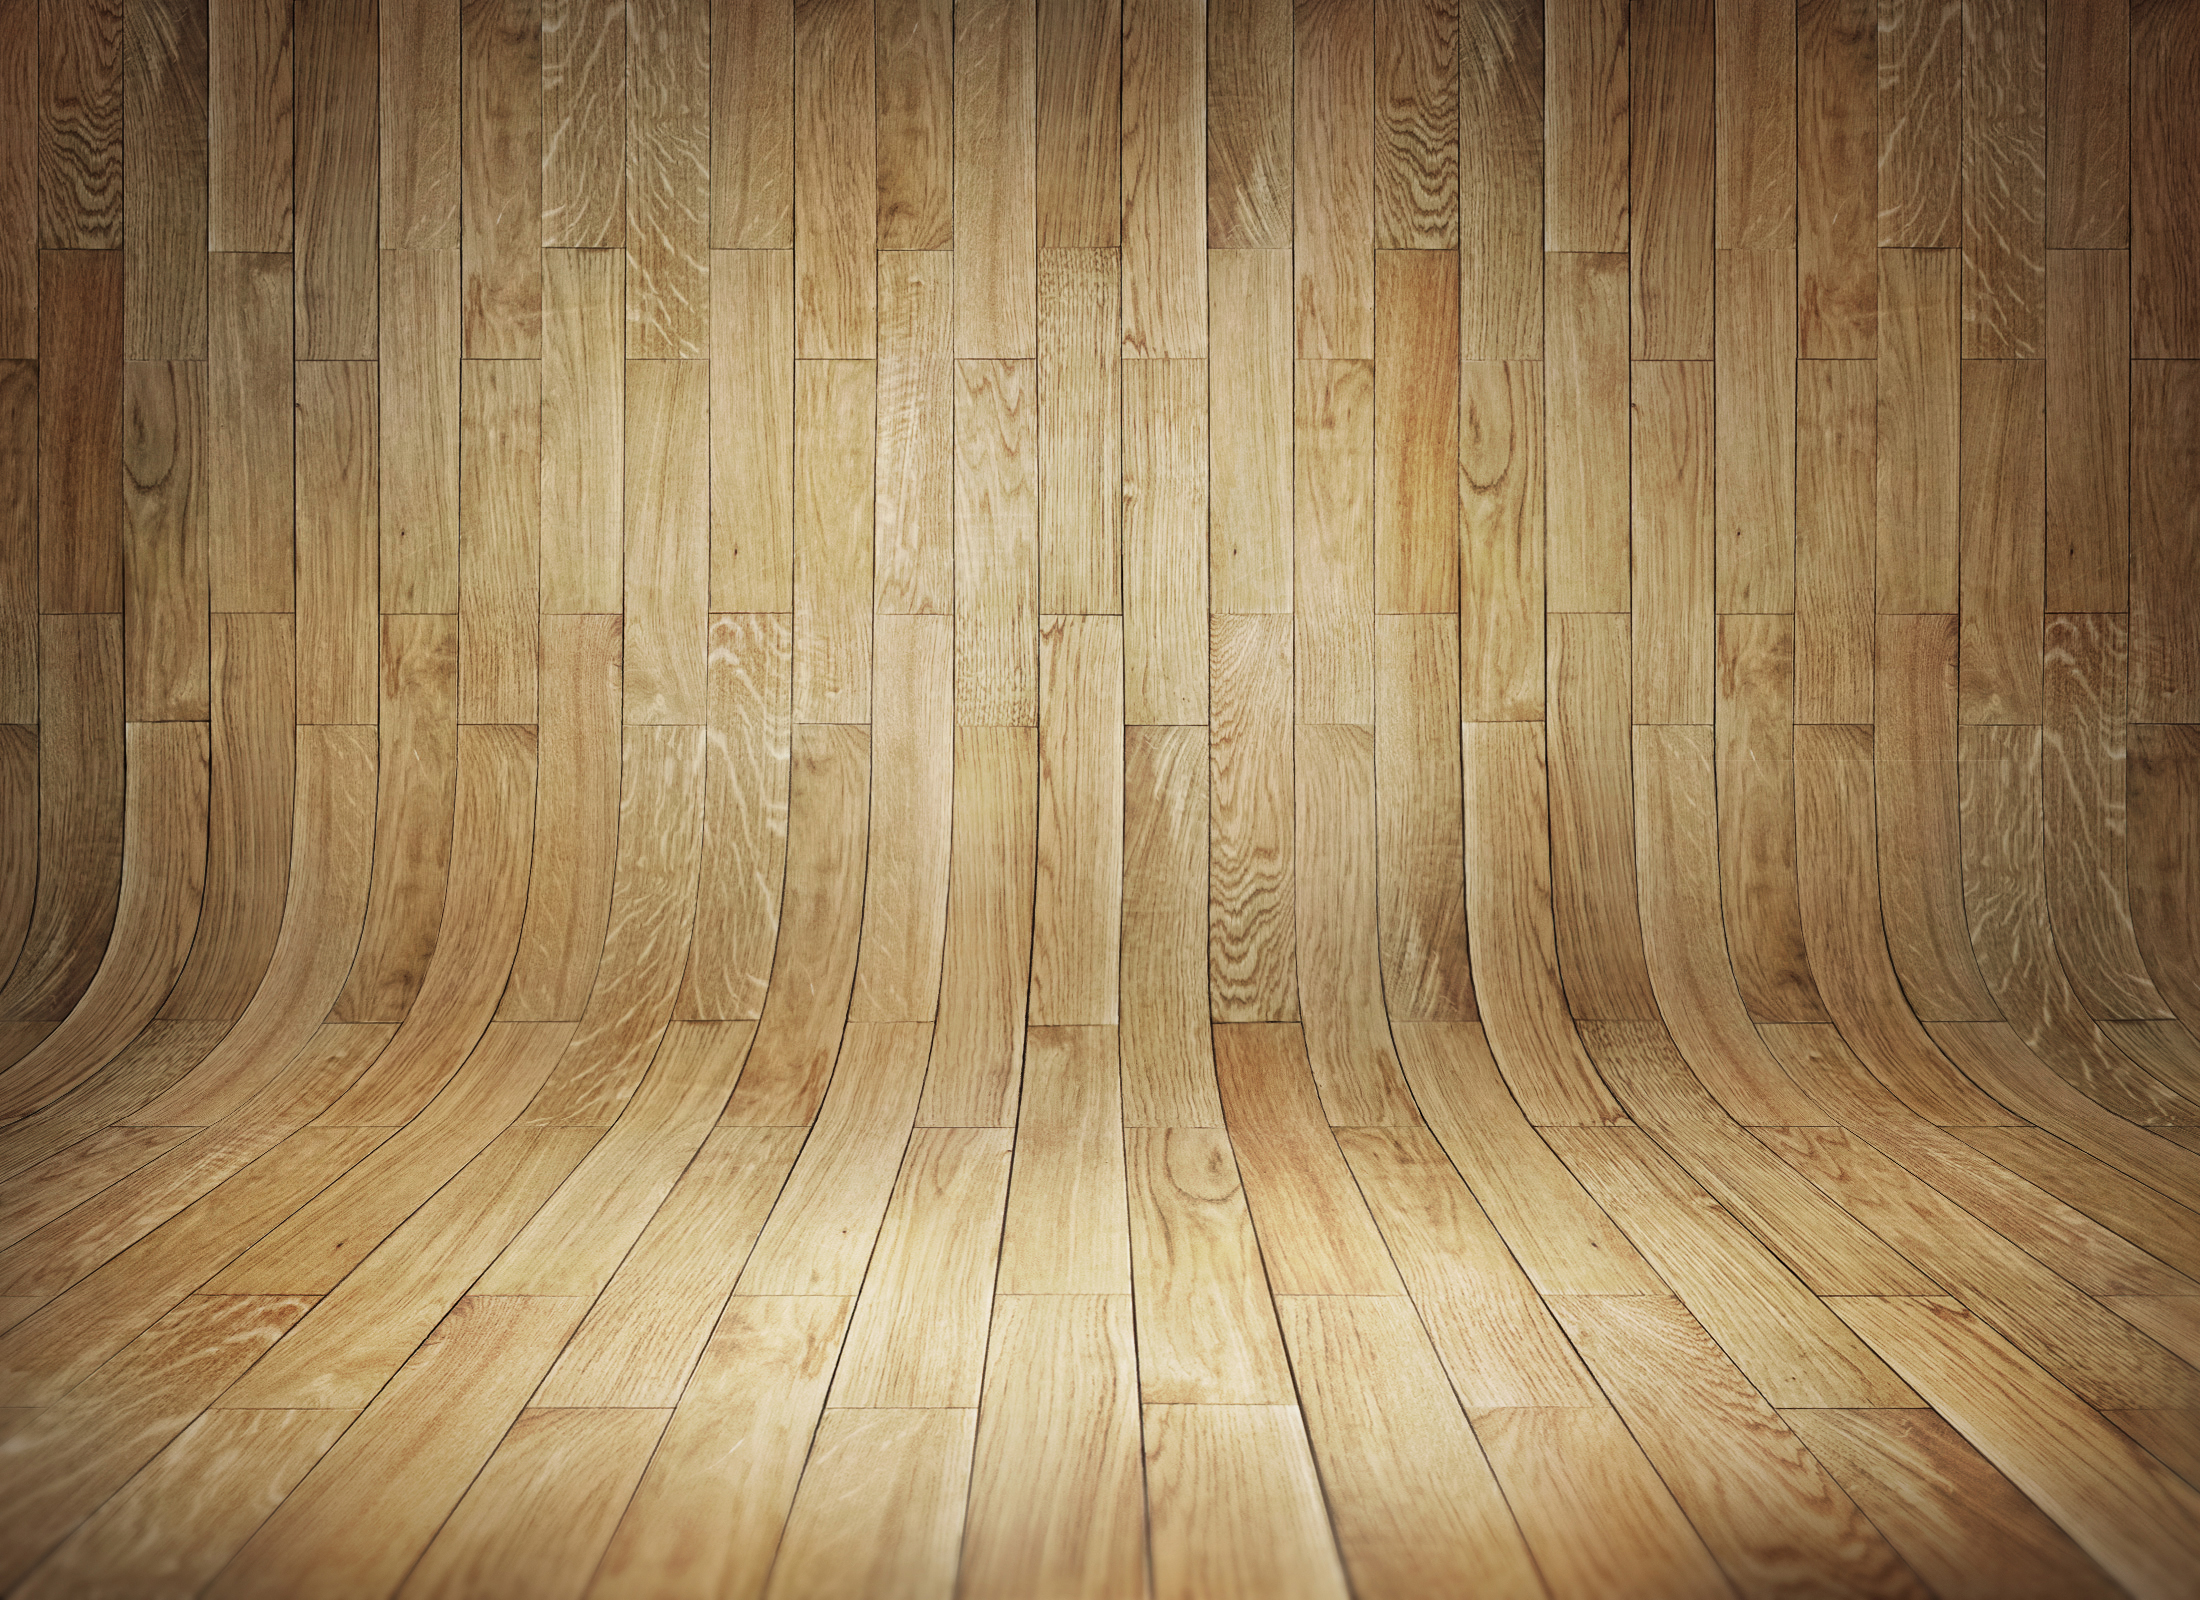 Woodworking backgrounds Main Image